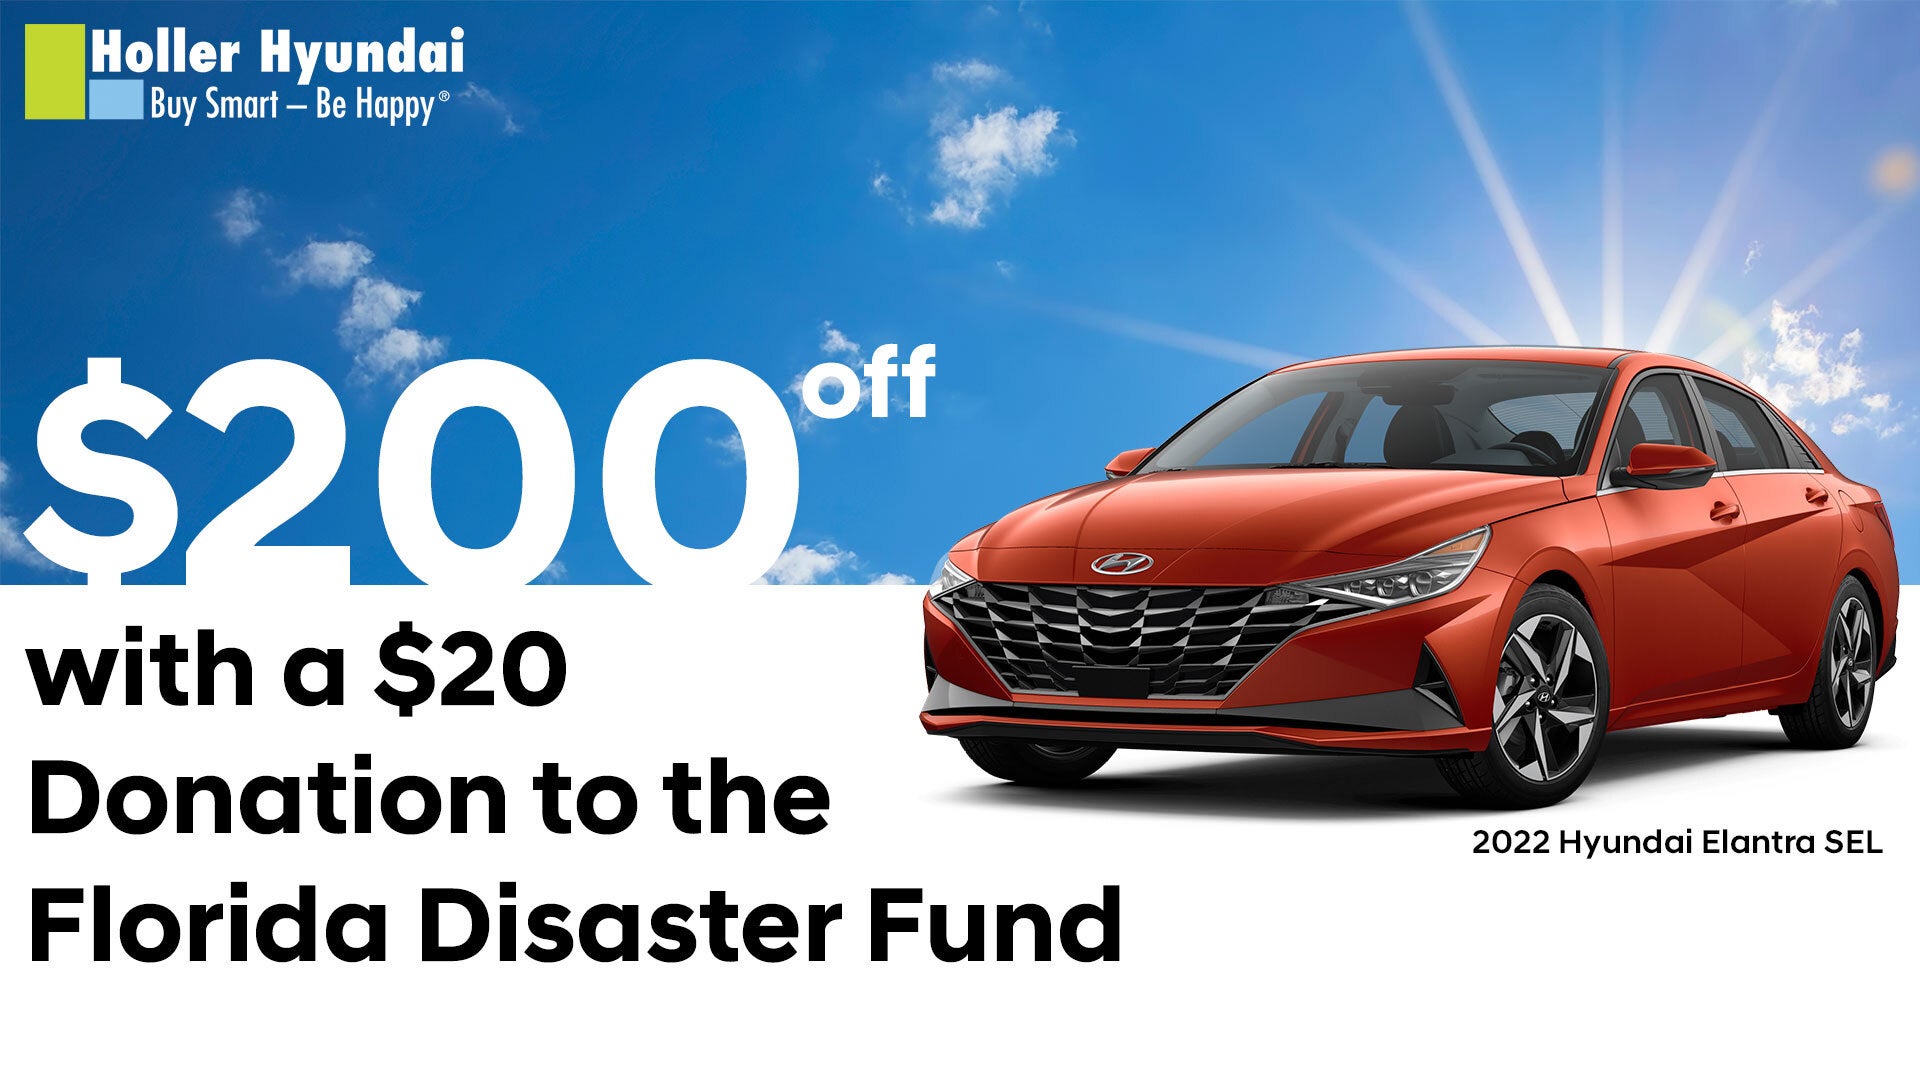 $200 off with donation of $20 or more to Florida Disaster Fund